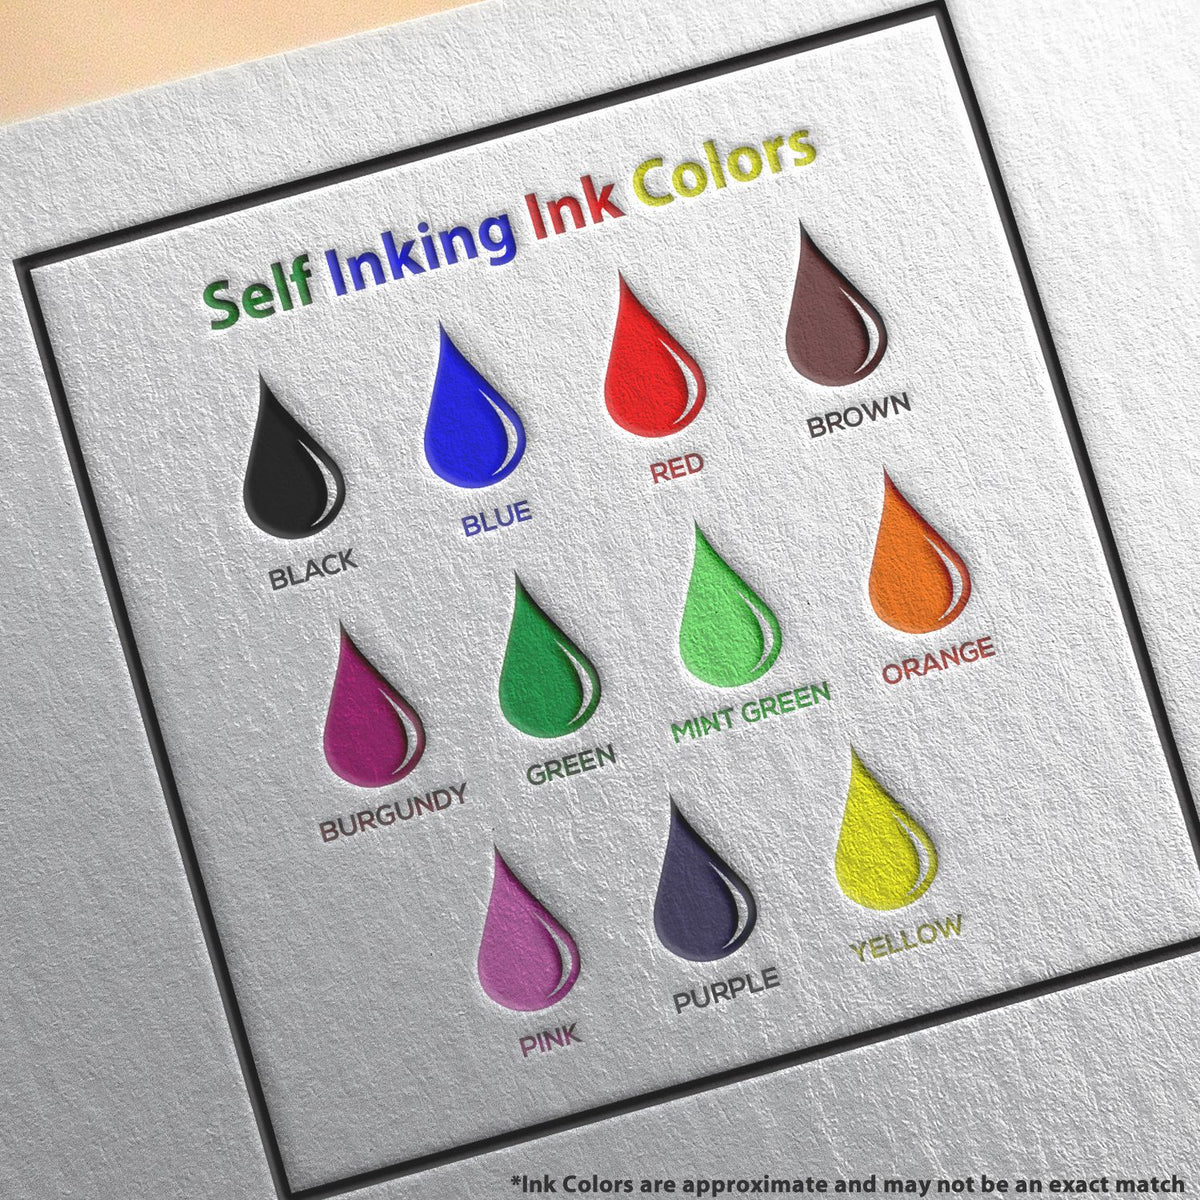 A picture showing the different ink colors or hues available for the Self-Inking Rectangular Georgia Notary Stamp product.